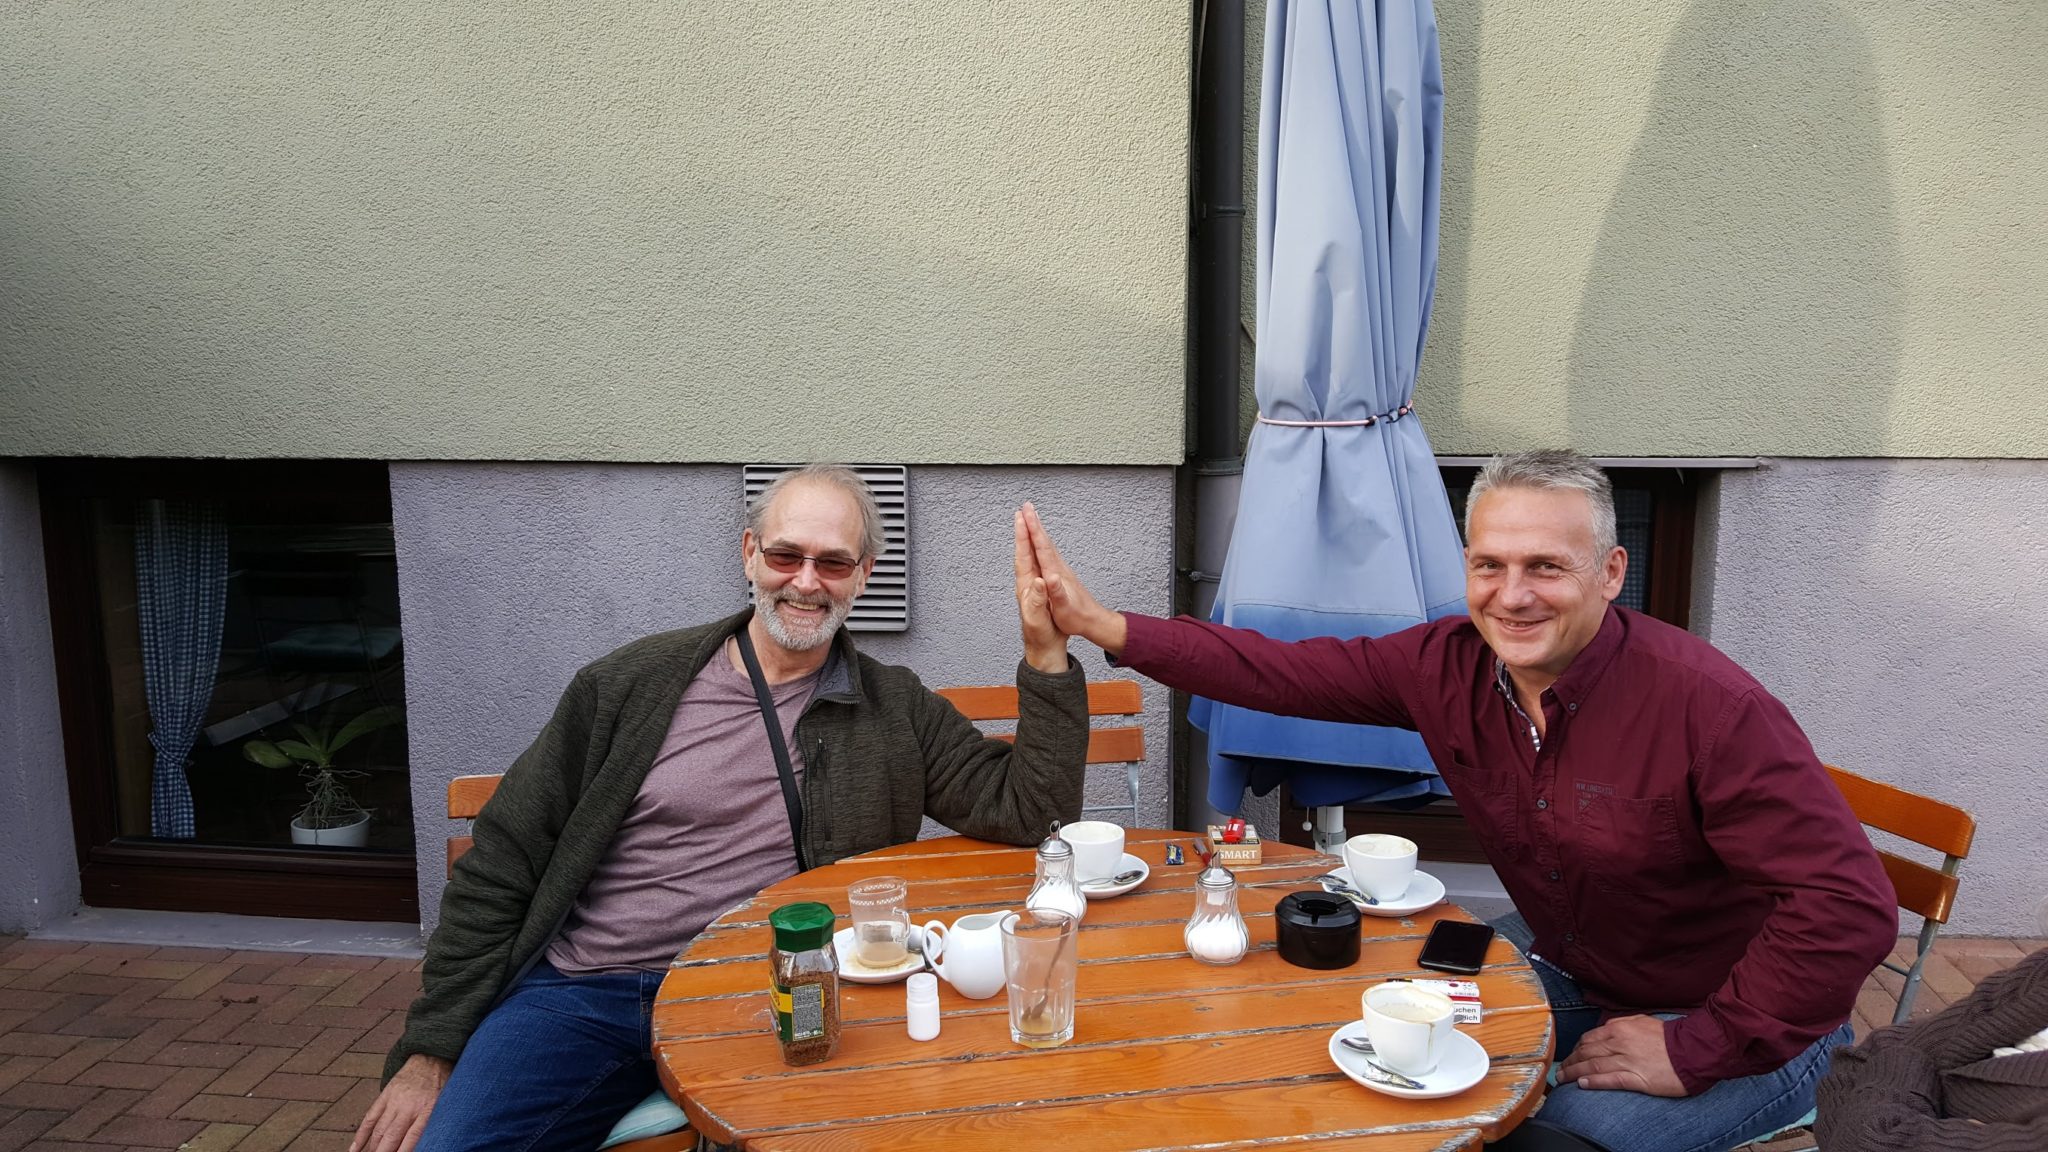 Me on the left with my donor Ralf on the right in September 2018, in Aschaffenburg, Bavaria, Germany thirty months post transplant.